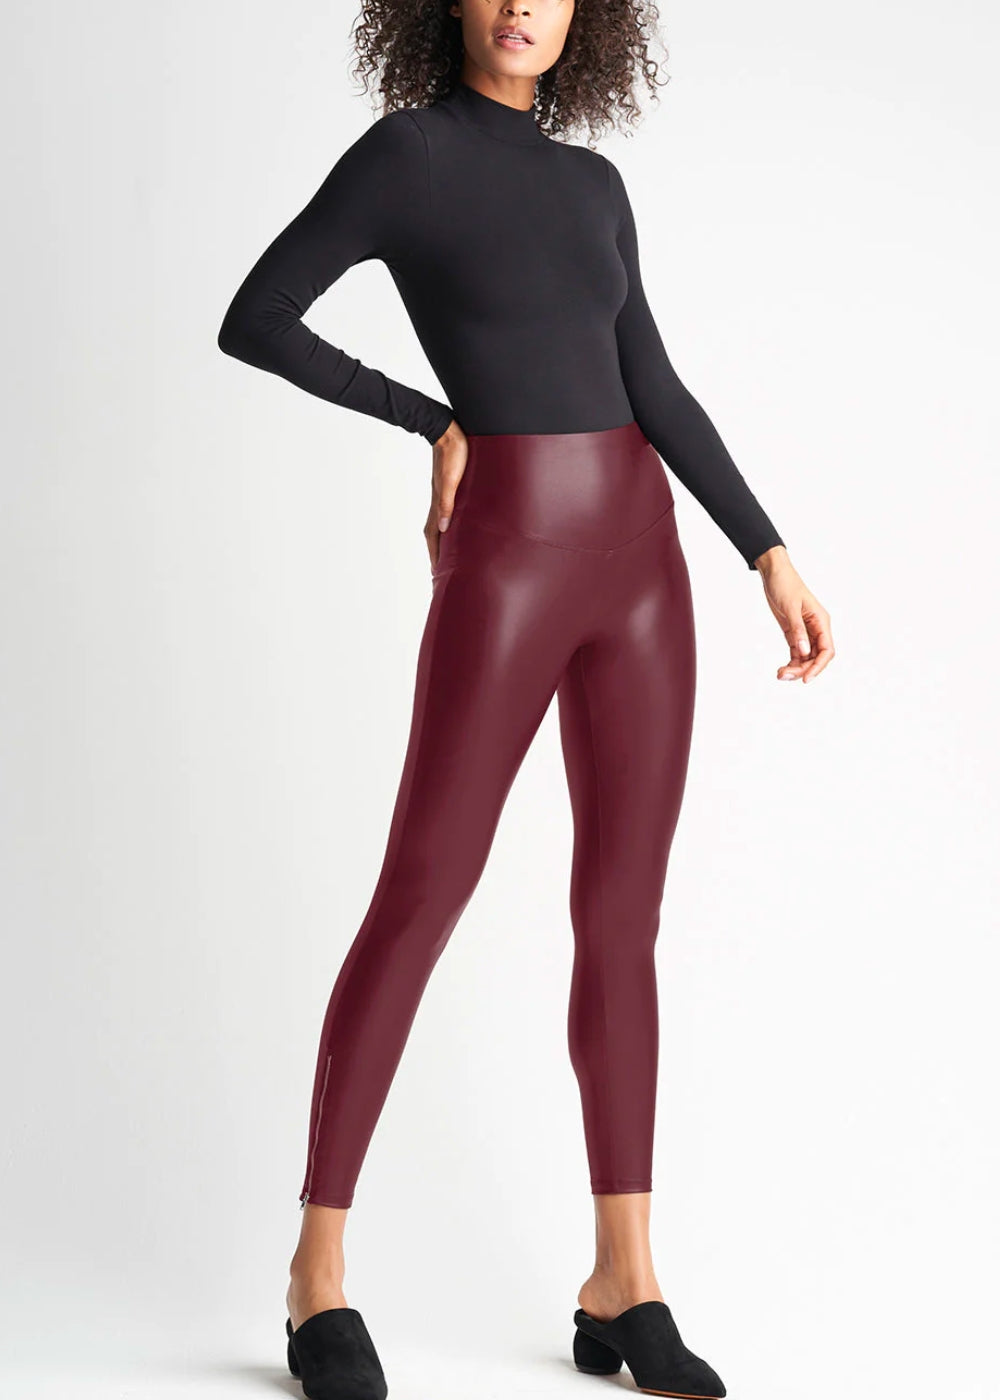 Faux Leather Shaping Legging with Side Zip from Yummie in Zinfandel  - 1